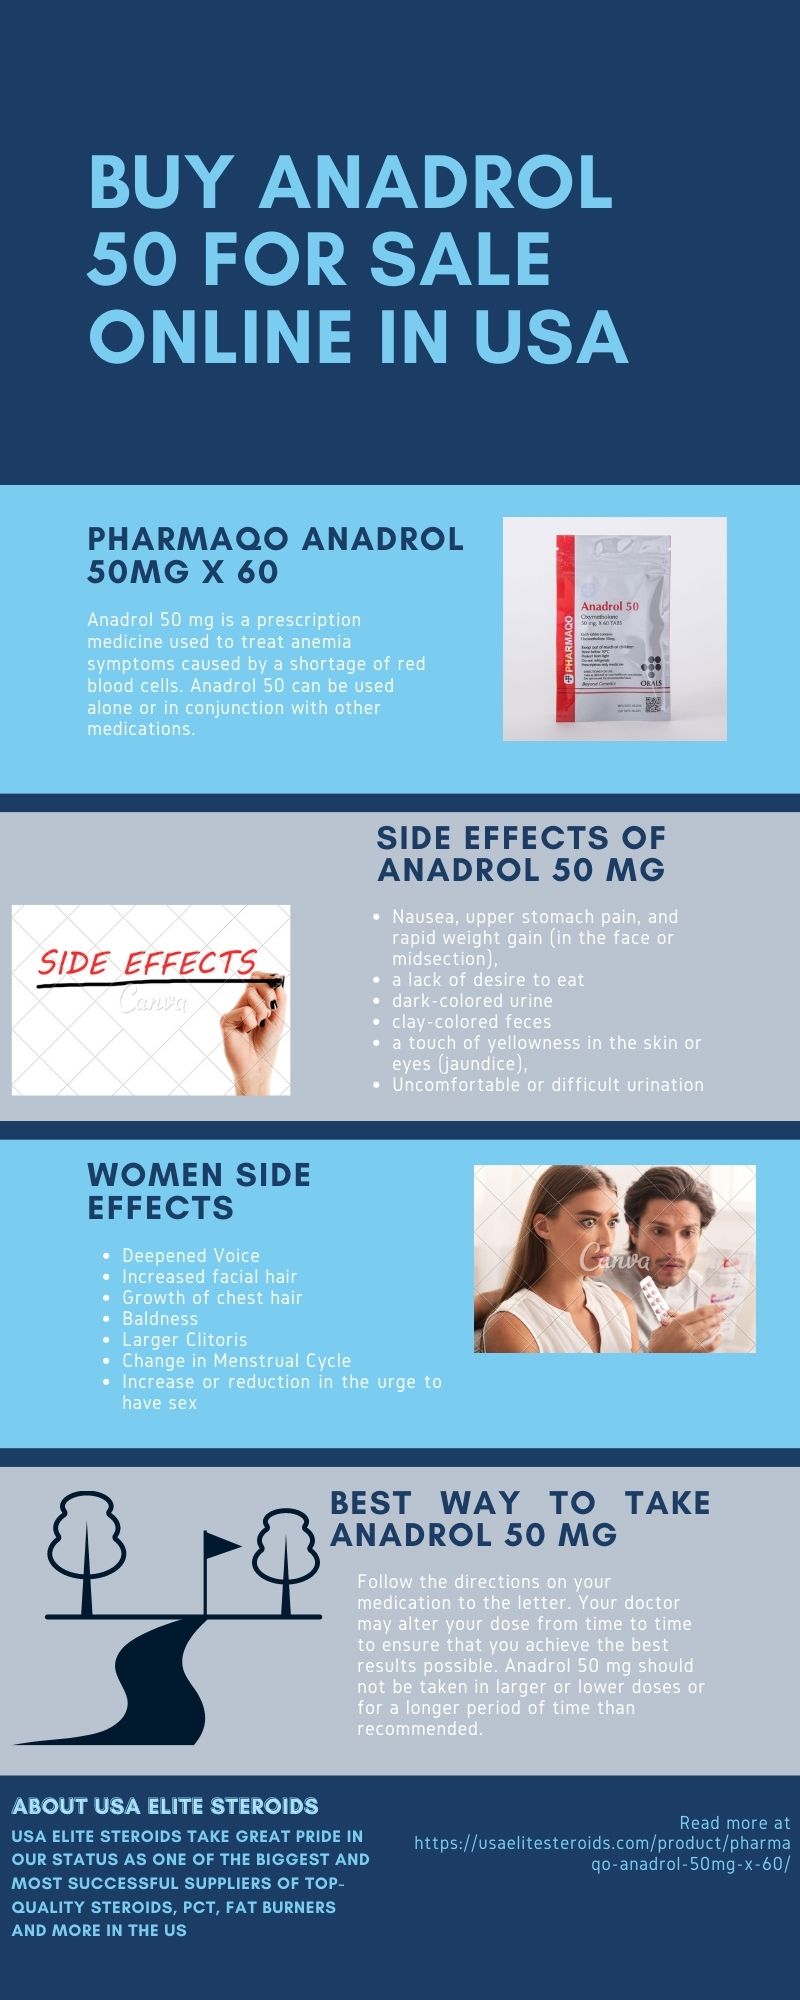 Anadrol 50 for Sale